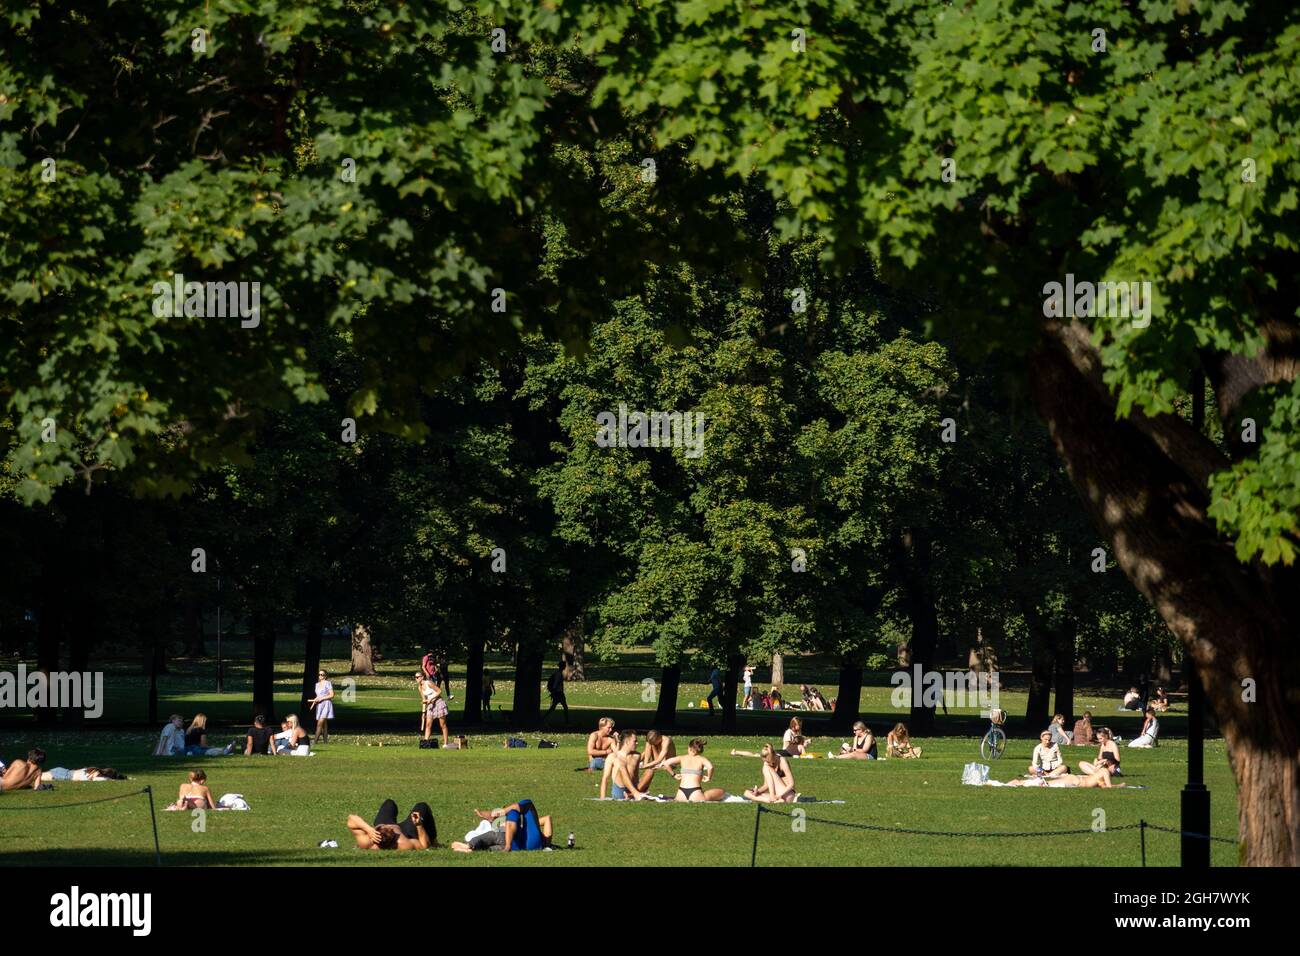 People enjoying the sun on an unusually hot day at the Frogner Park in Oslo, Norway Stock Photo